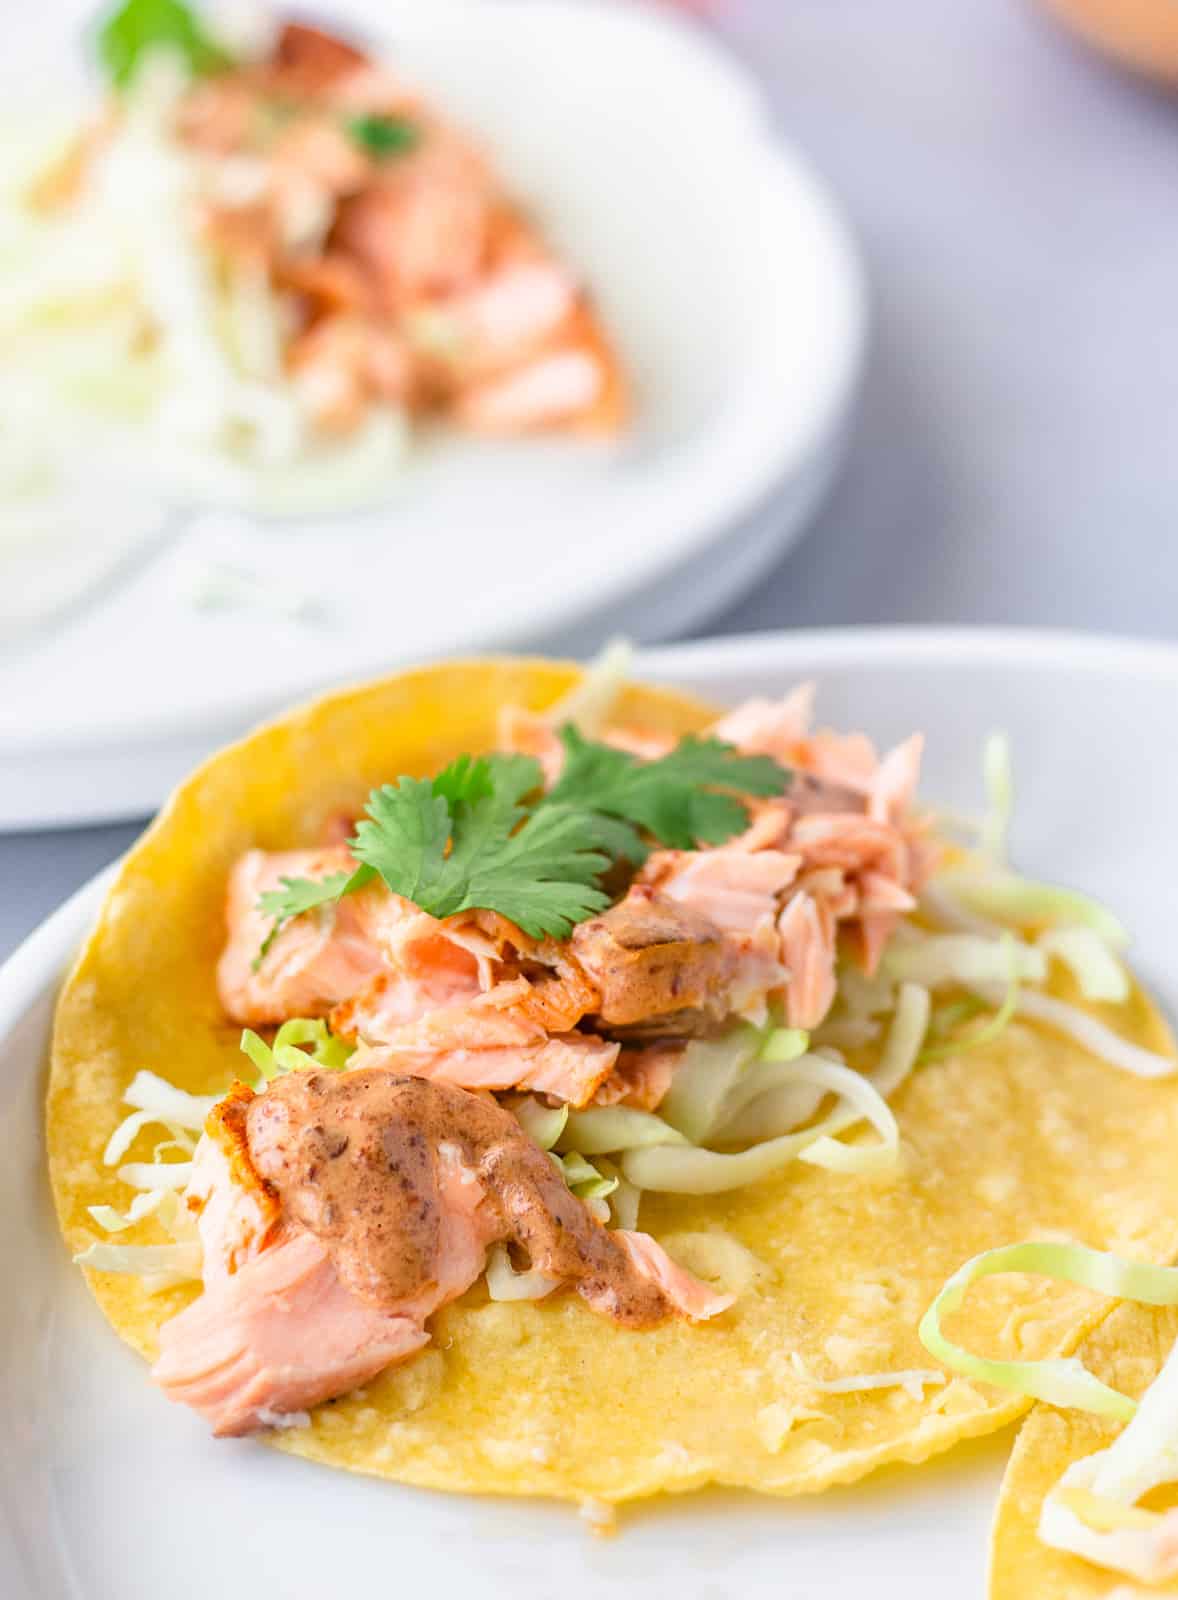 Yellow corn tortilla with flaked salmon, shredded lettuce, chipotle sauce and cilantro on a white plate.